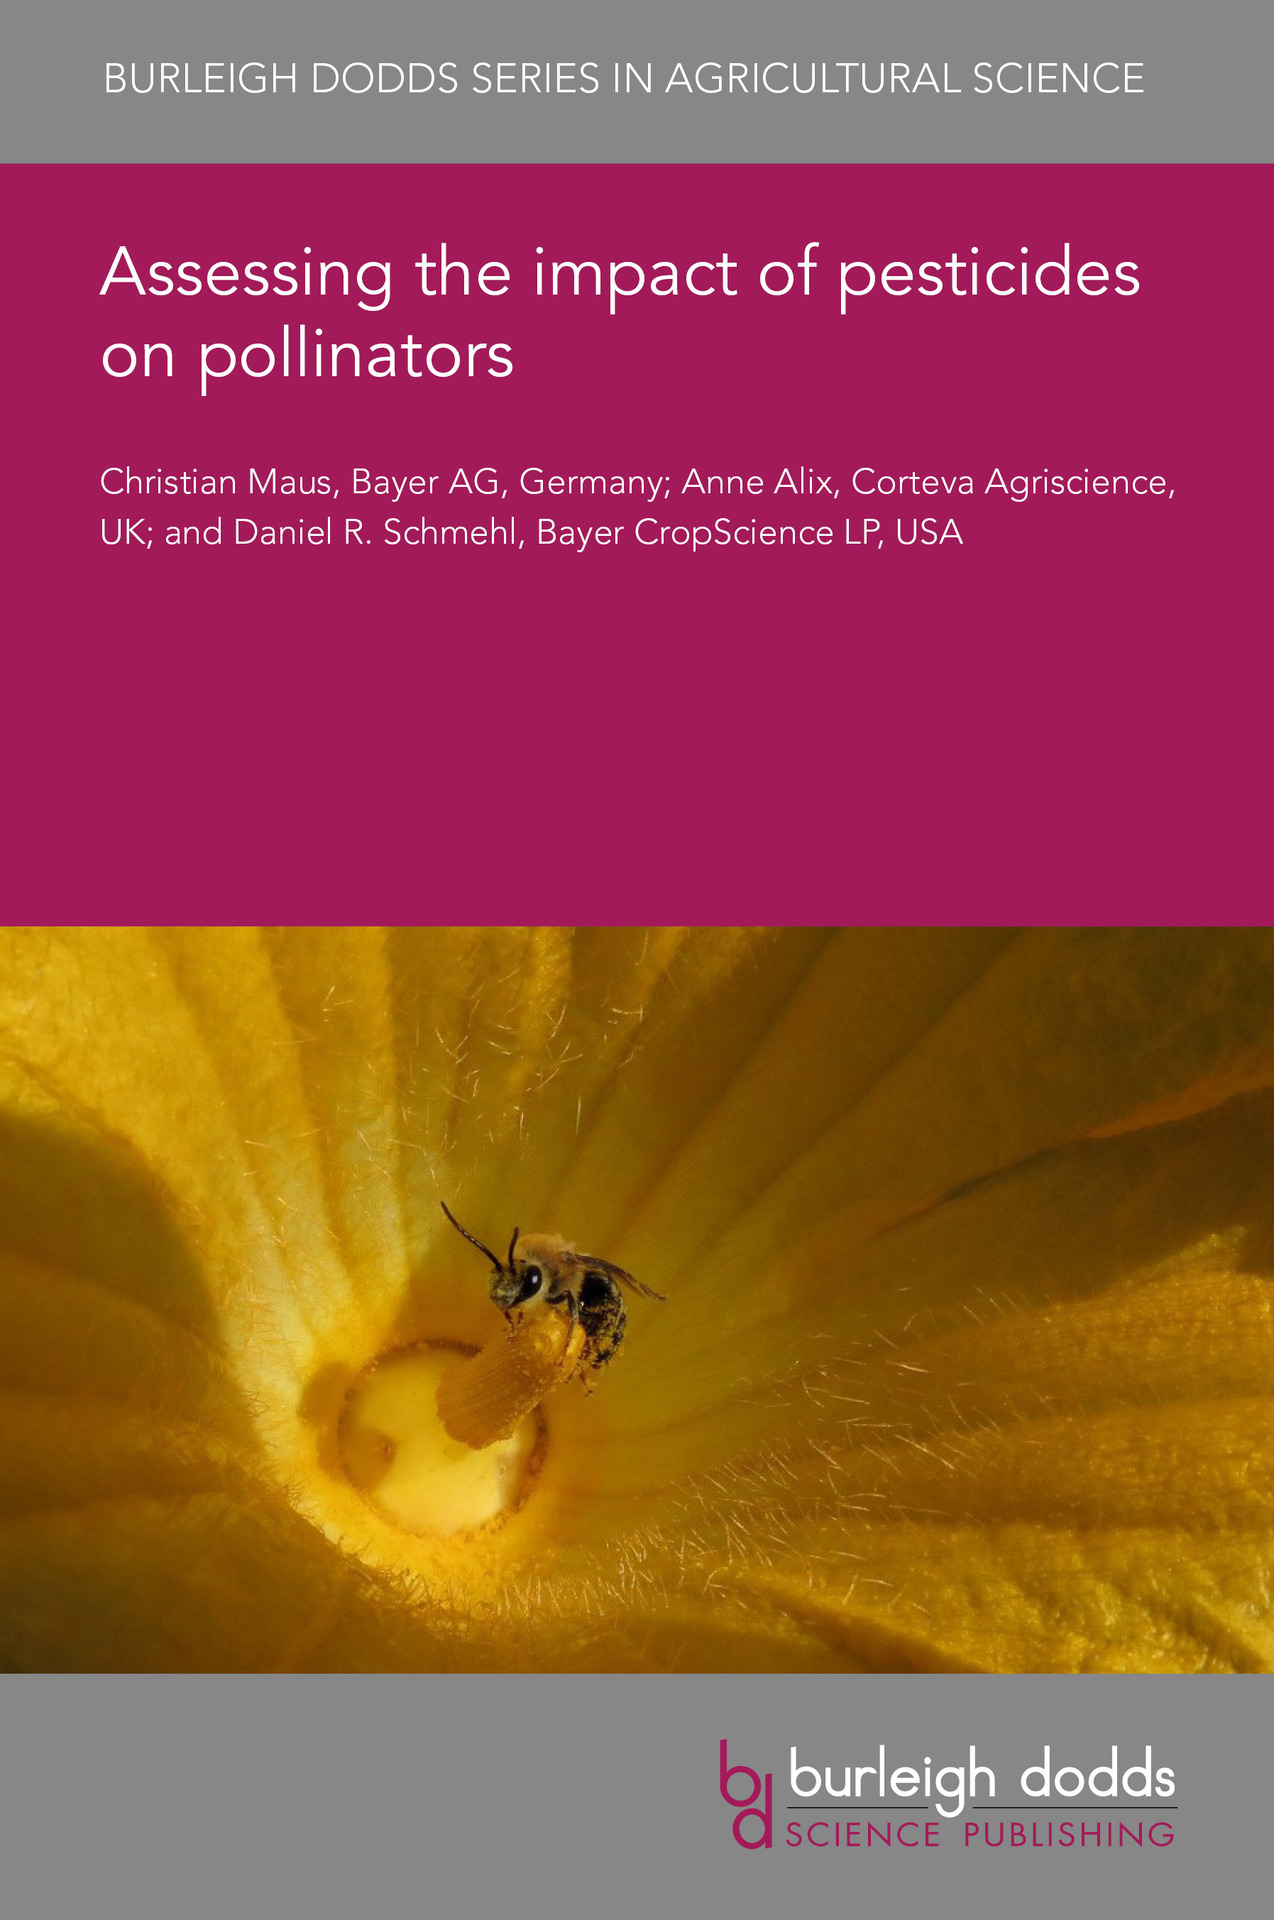 Assessing the impact of pesticides on pollinators